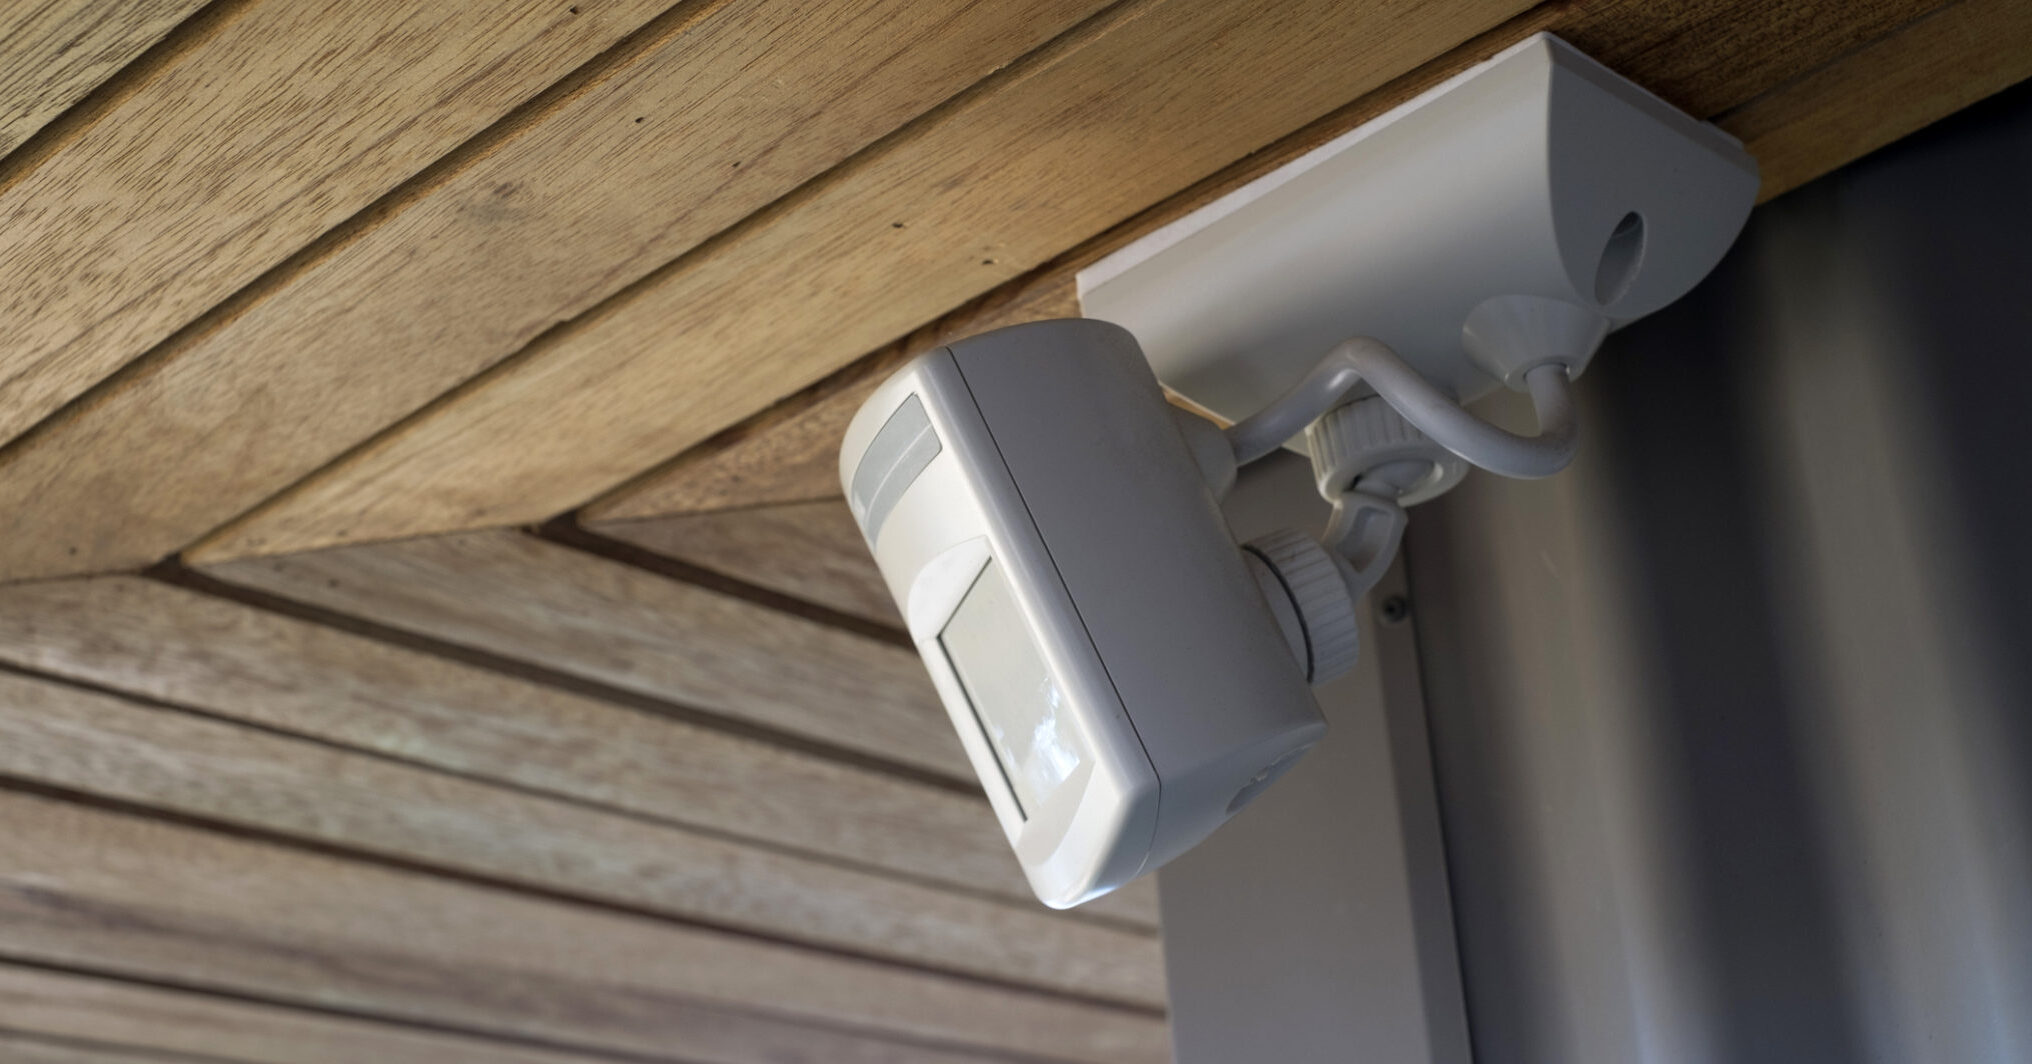 Where Is The Ideal Location To Place A Motion Detector?